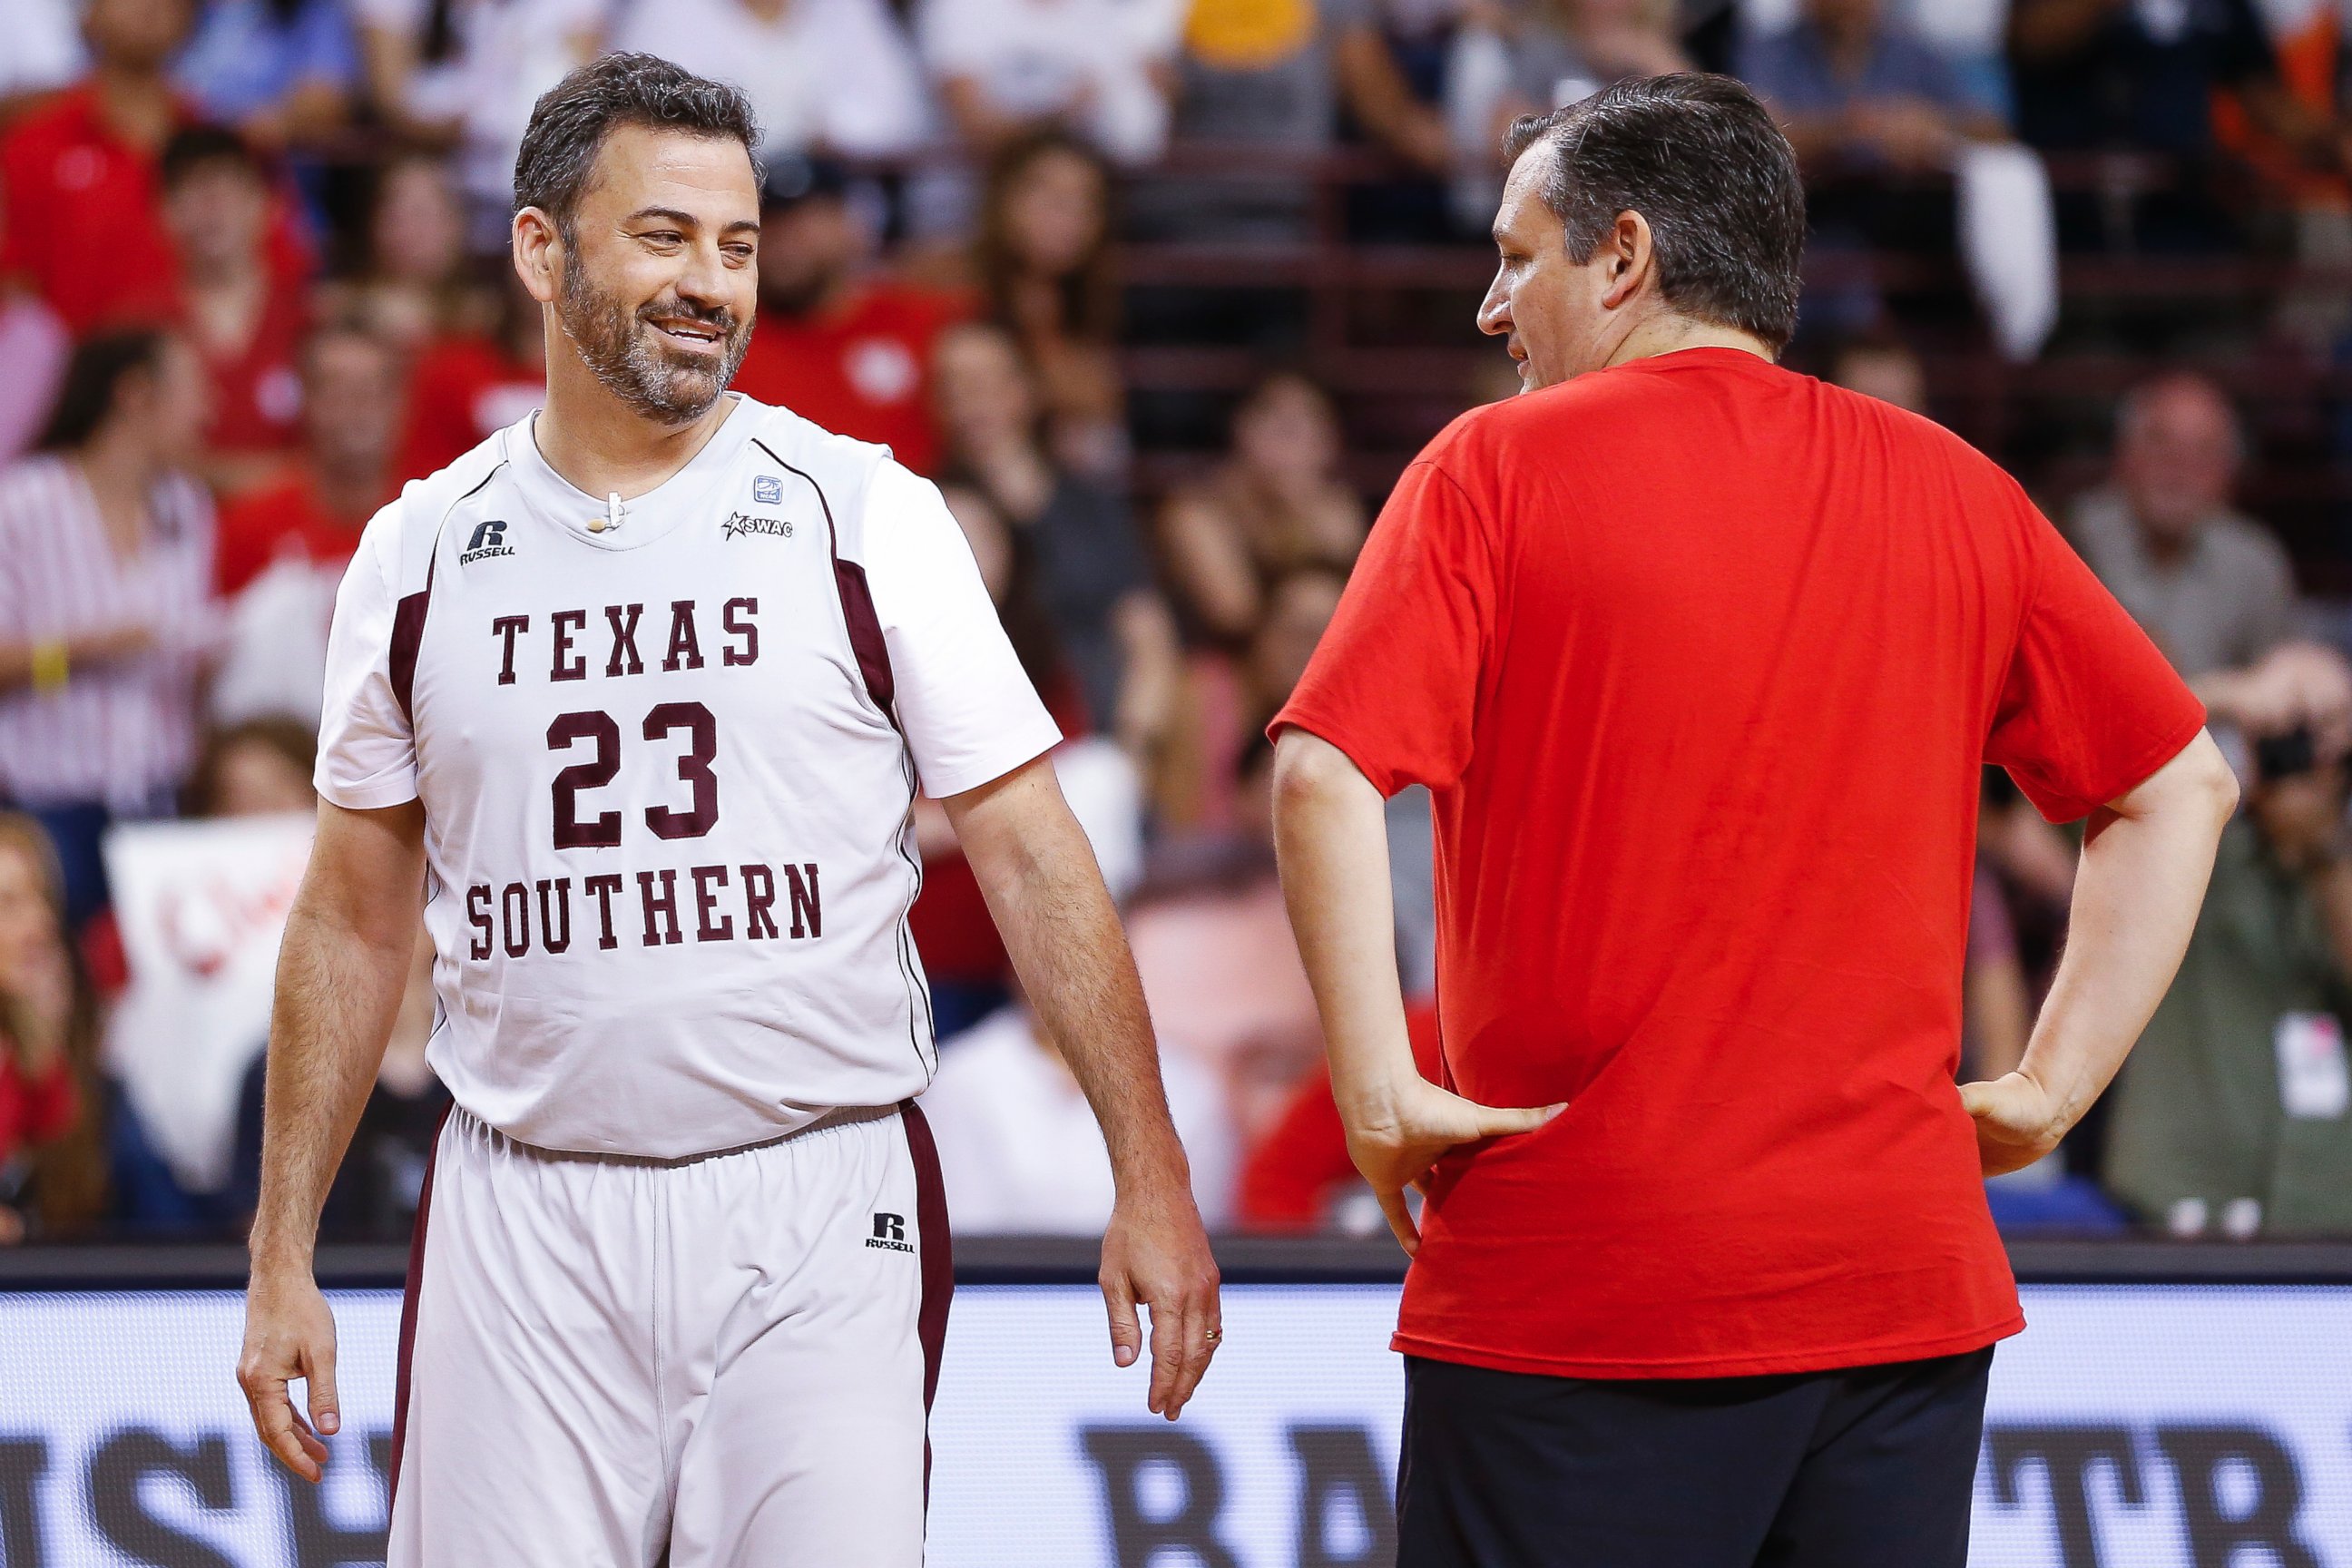 Jimmy Kimmel and Sen. Ted Cruz face off during the Blobfish Basketball Classic and one-on-one interview at Texas Southern University's Health & Physical Education Arena Saturday, June 16, 2018 in Houston.